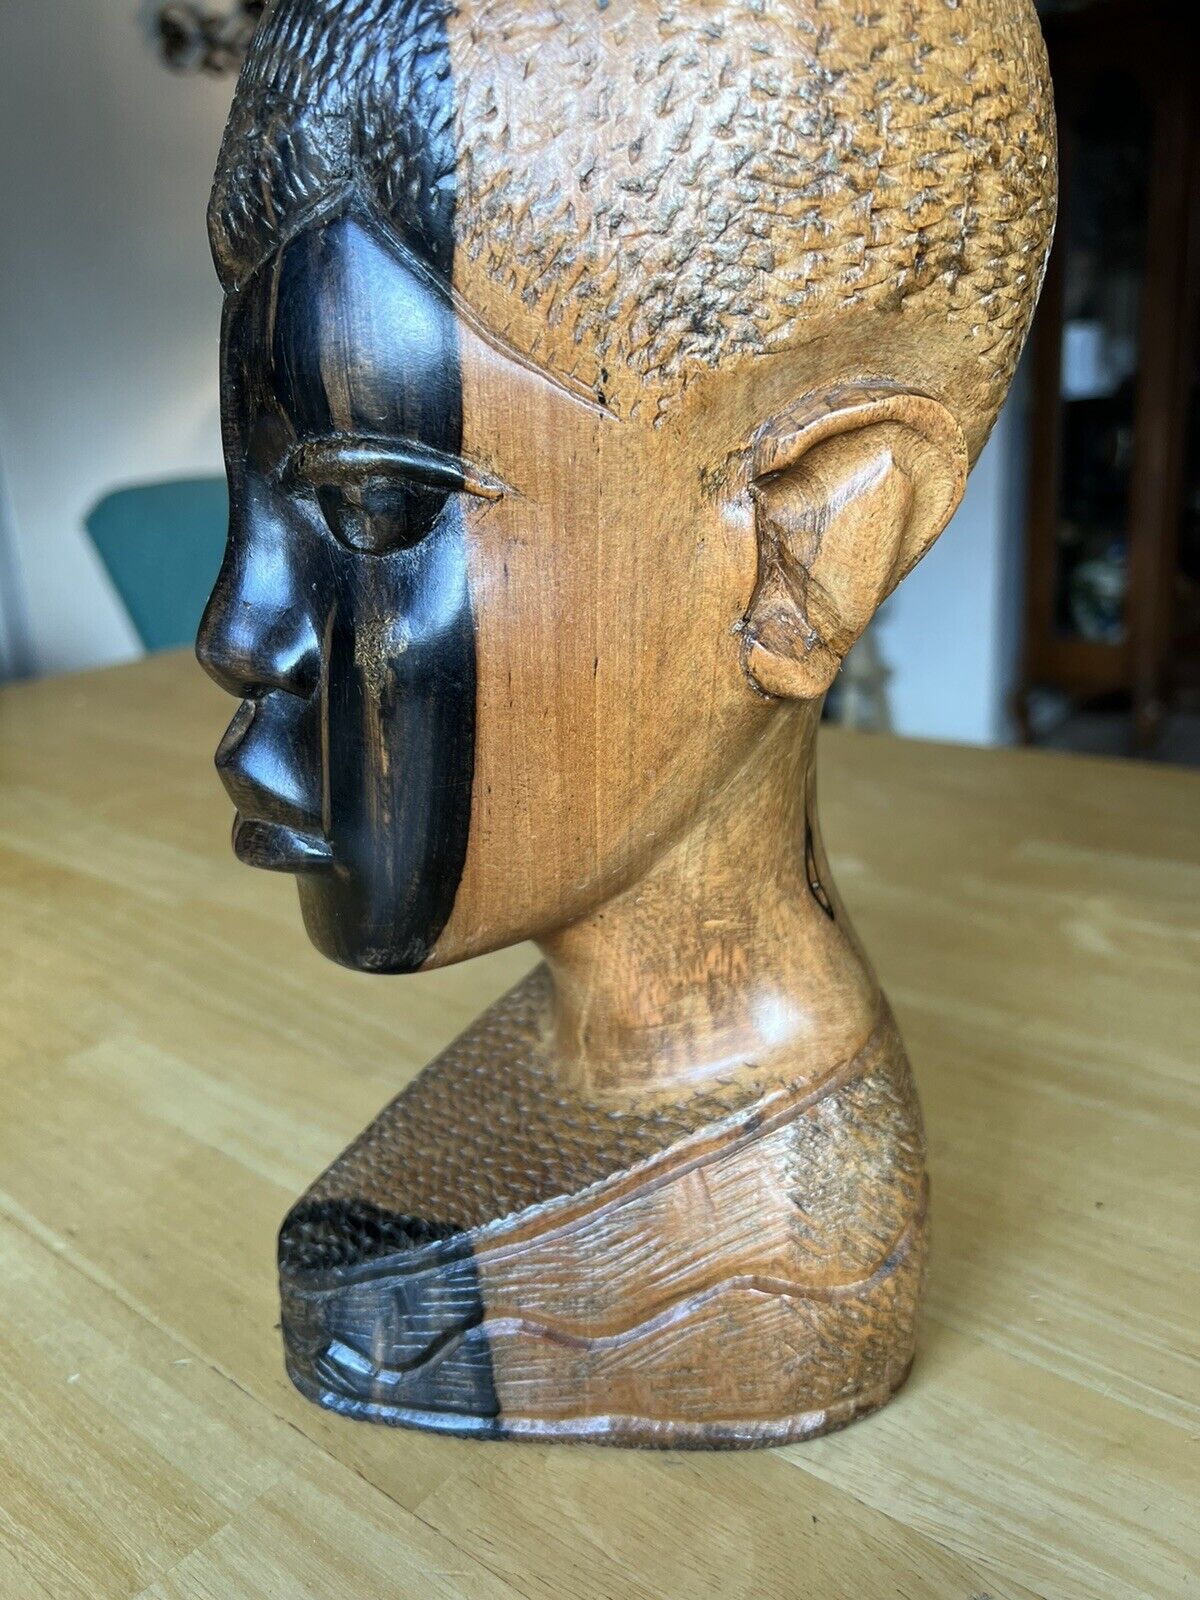 12” Sculpture Mid Century African Hand Carved Ebony Wood Male Head Bust Statue